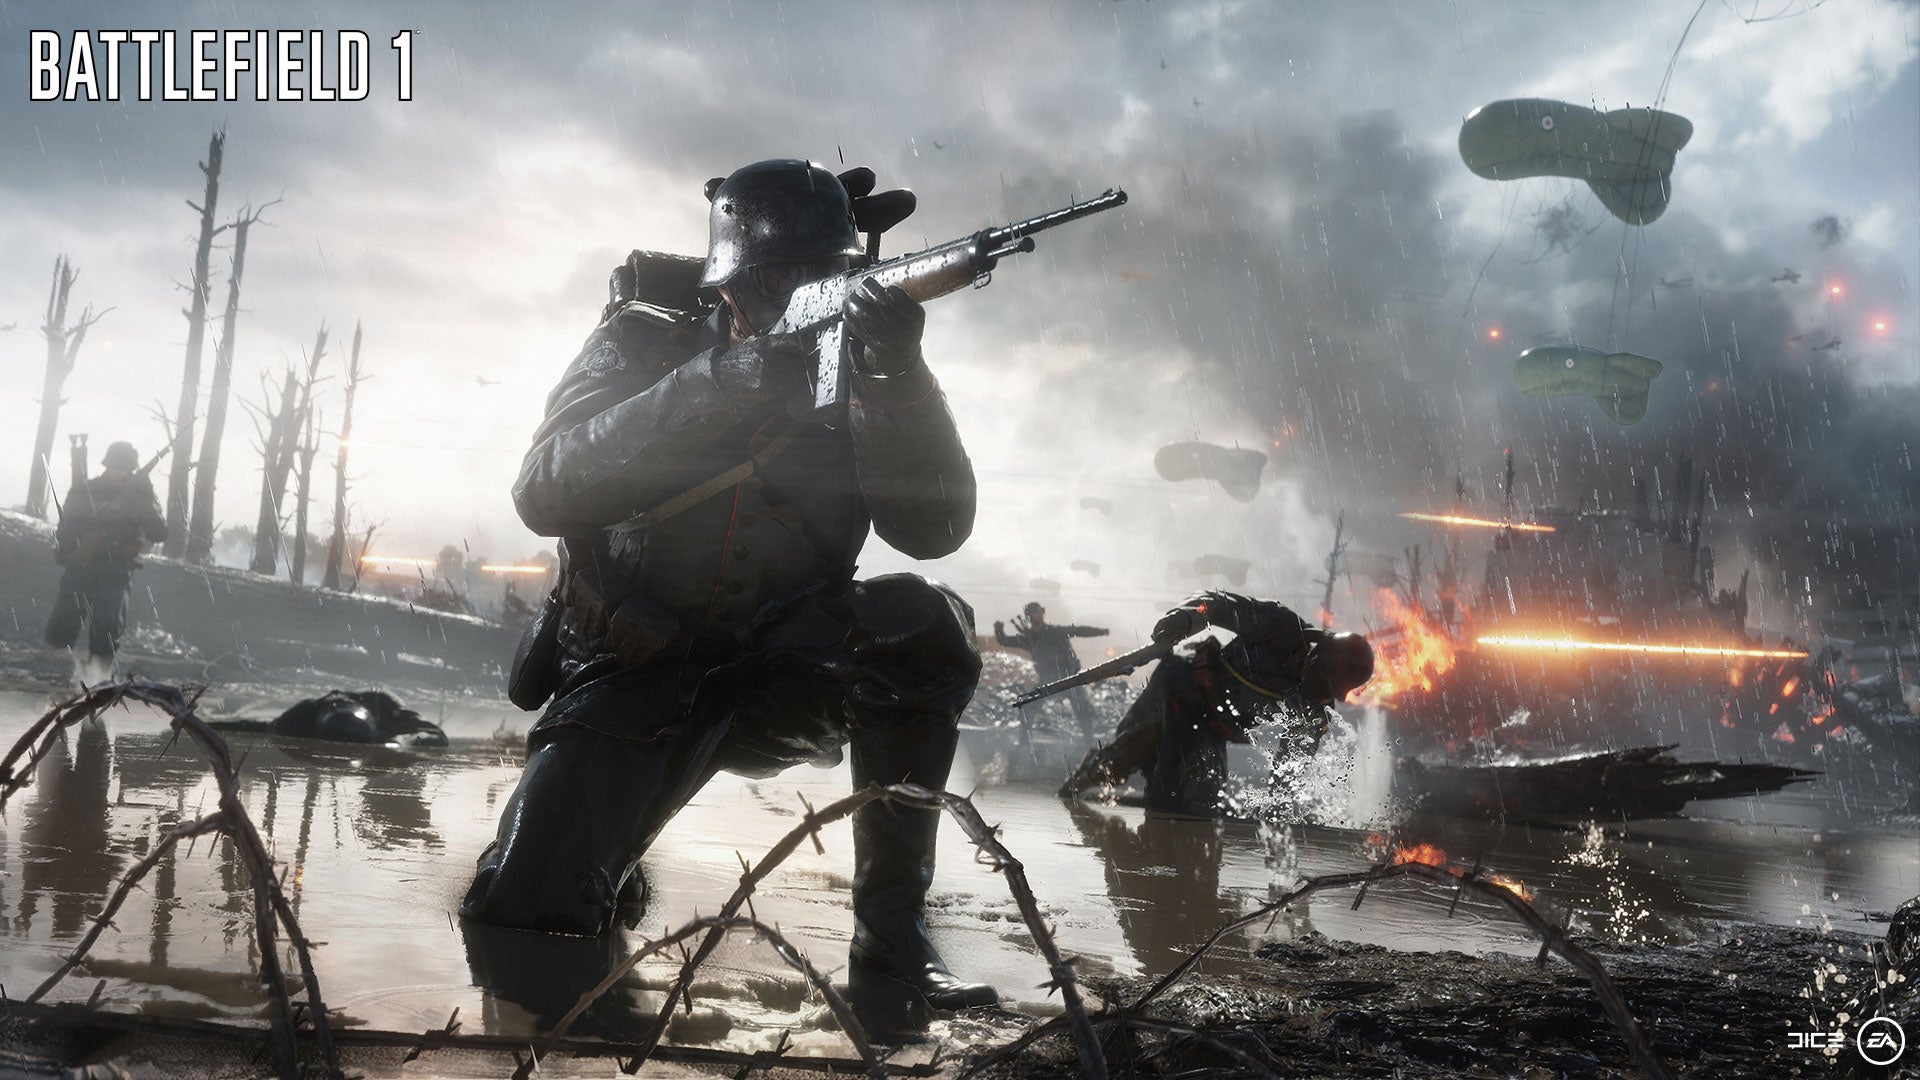 Image for Battlefield 1 players could soon see six new weapons added, per dataminers